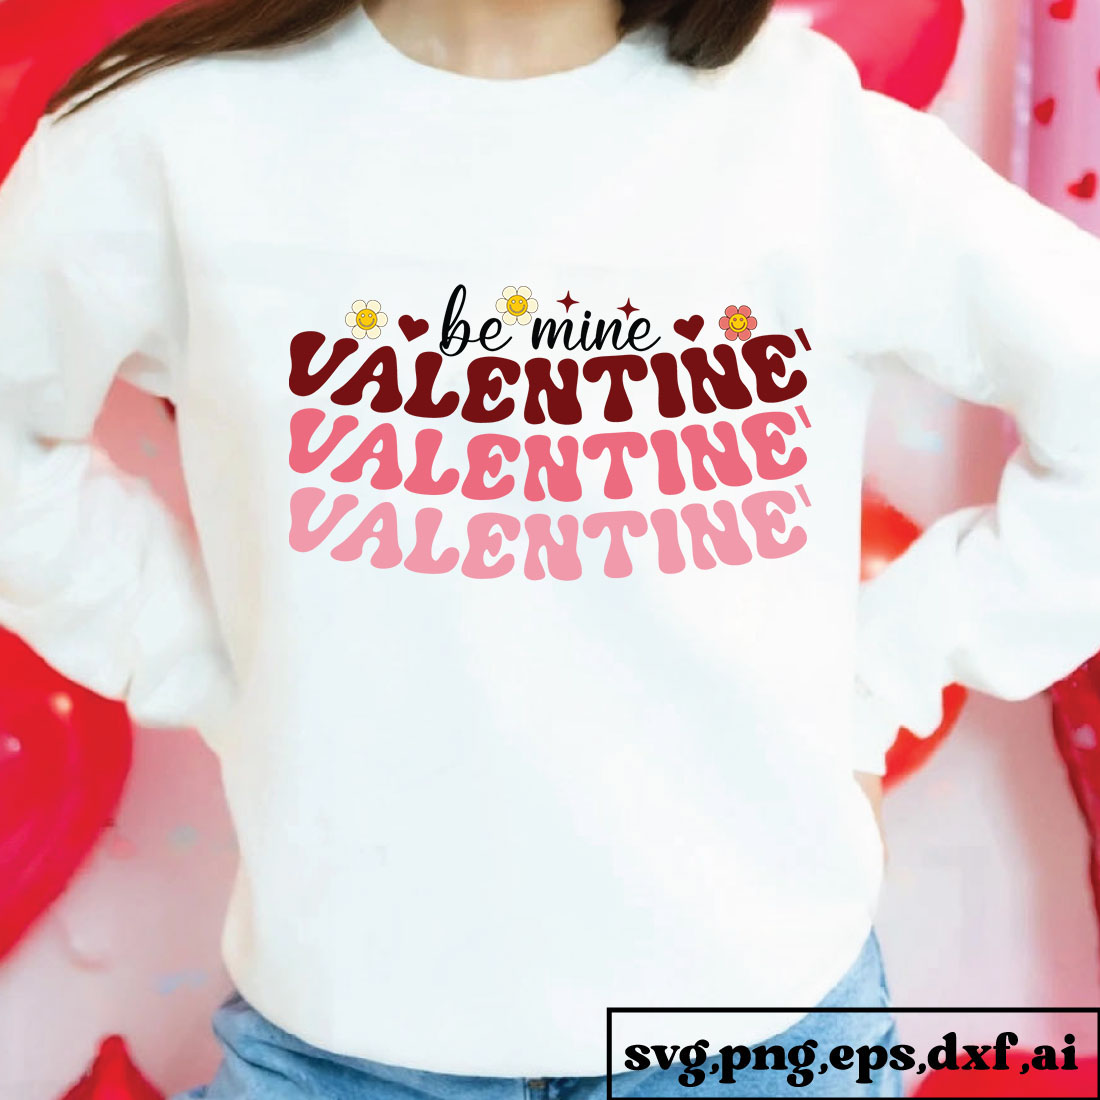 Be Mine Valentine's Sublimation cover image.